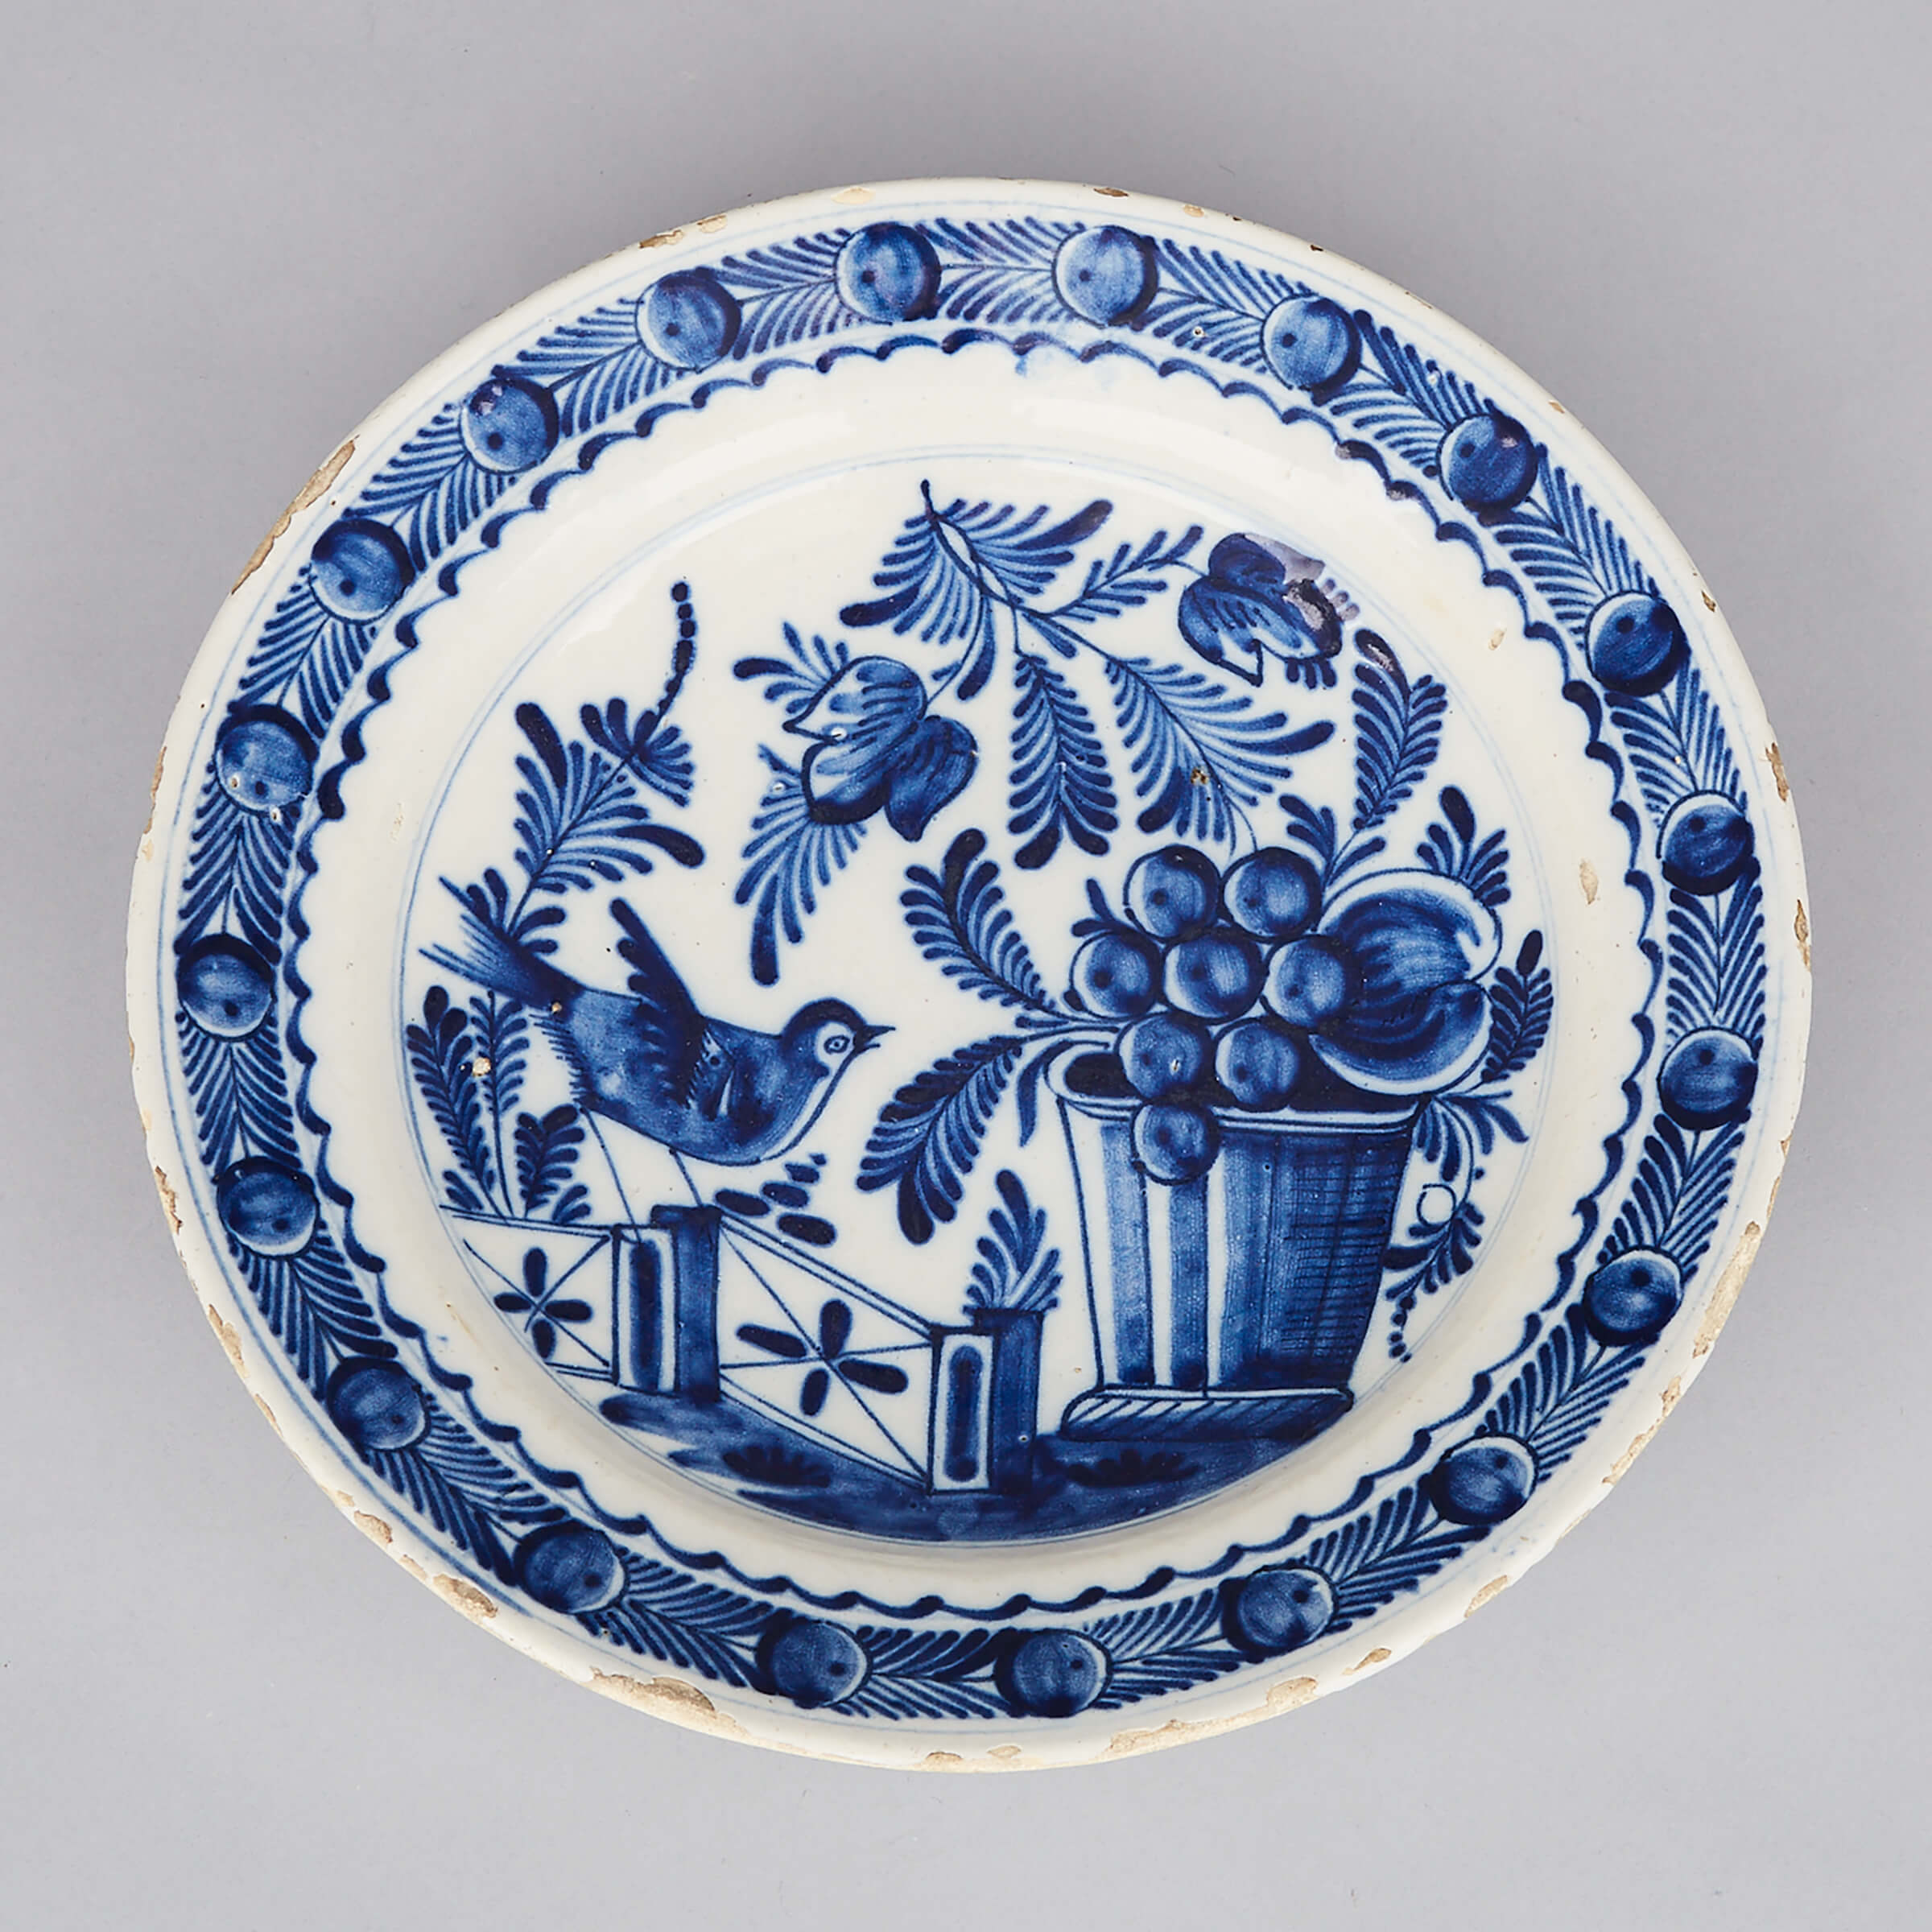 Delft Blue and White Charger, 18th century